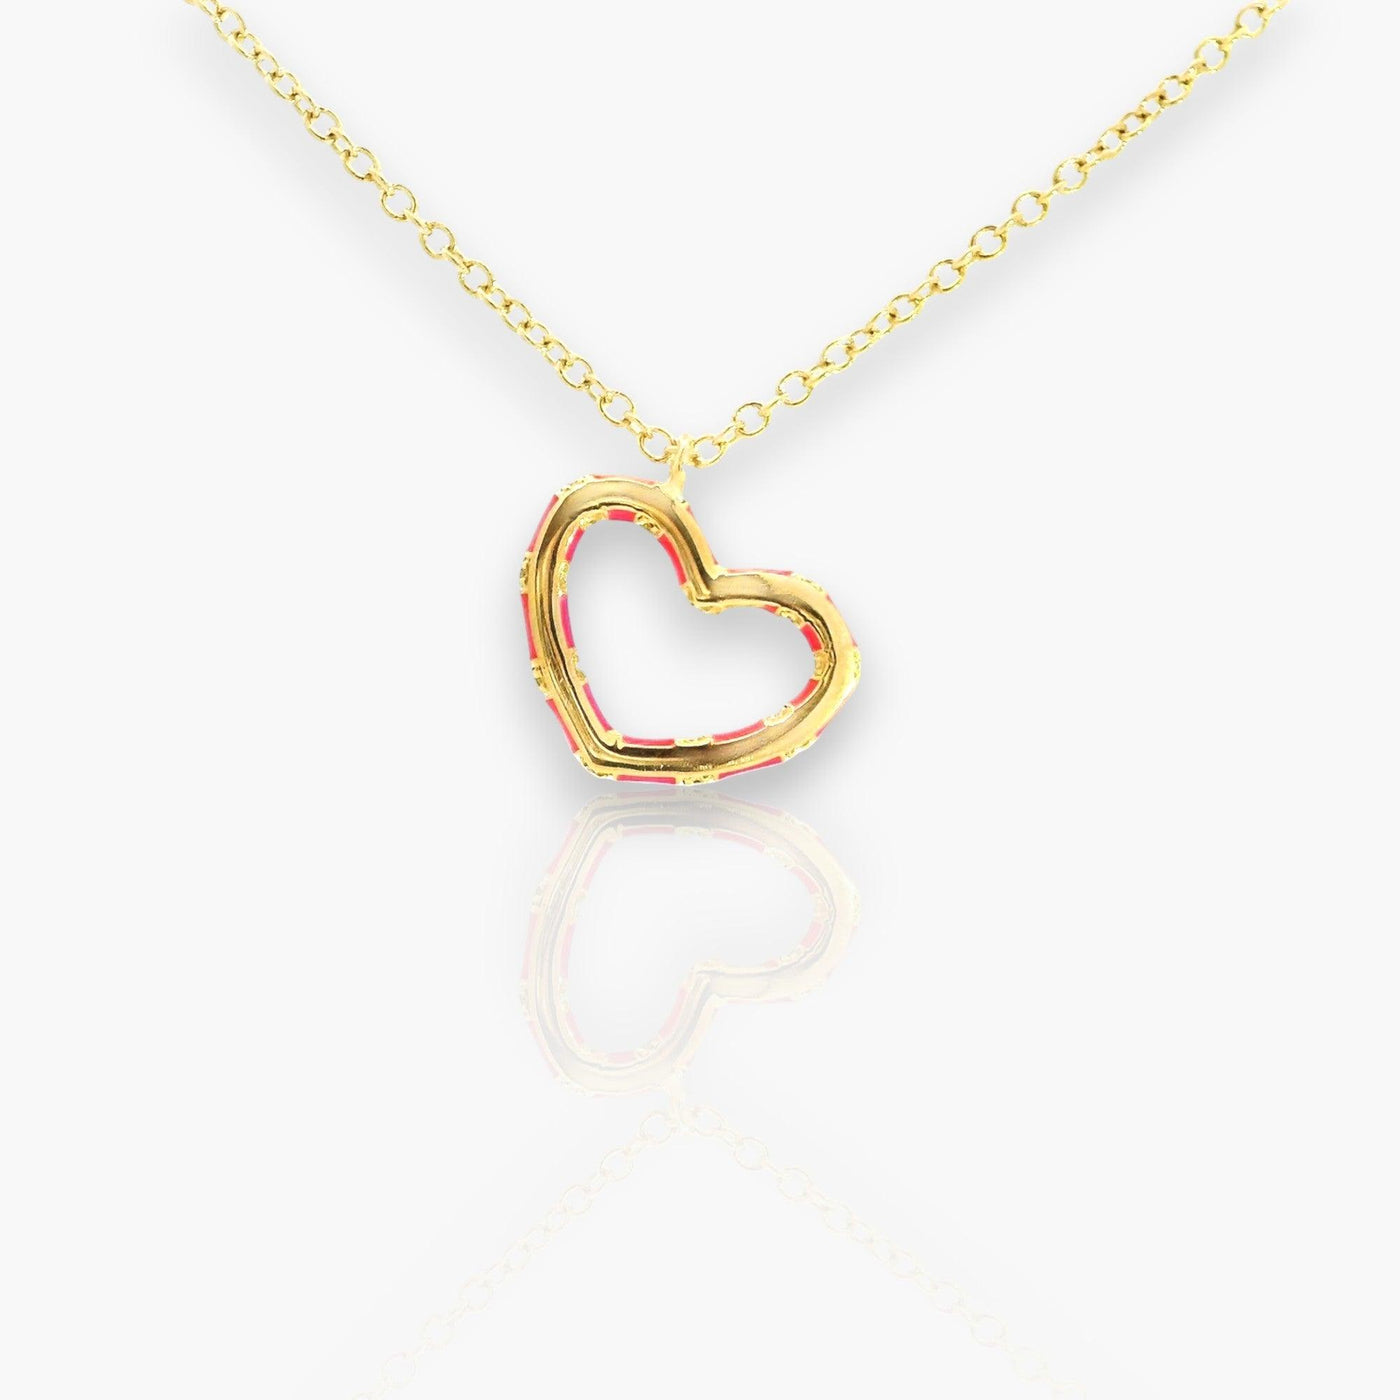 18K Yellow Gold necklace with red enamel and diamond heart pendant - Moregola Fine Jewelry